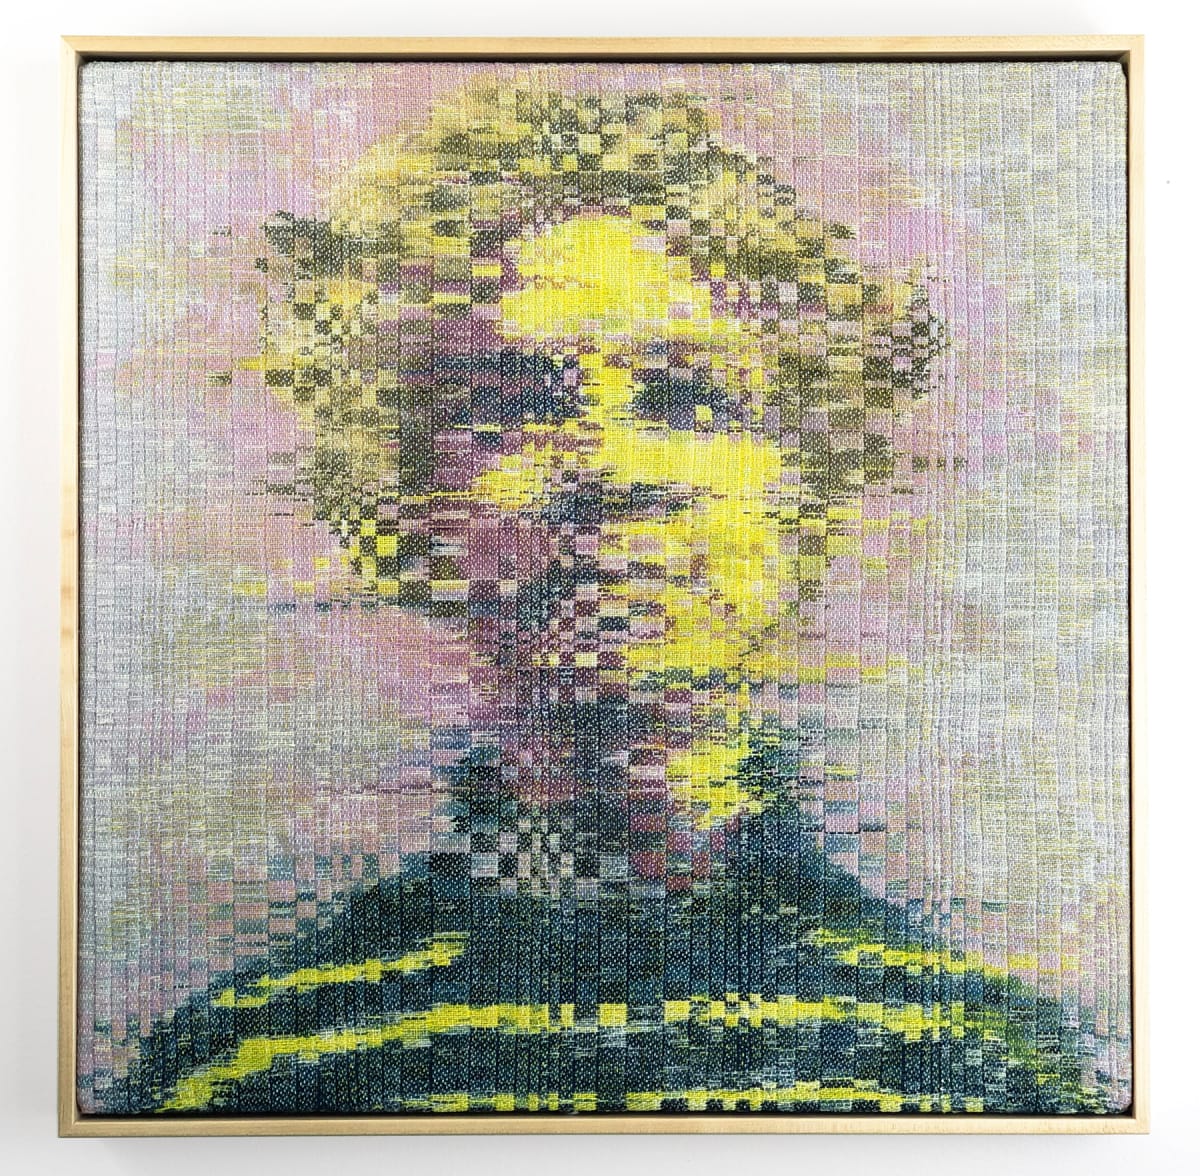 Willow by Melissa English Campbell  Image: Willow, 2020. 20” x 20”. Linen warp and weft. Warp painted with watercolor, and fabric dye. Woven on a Harris table loom
